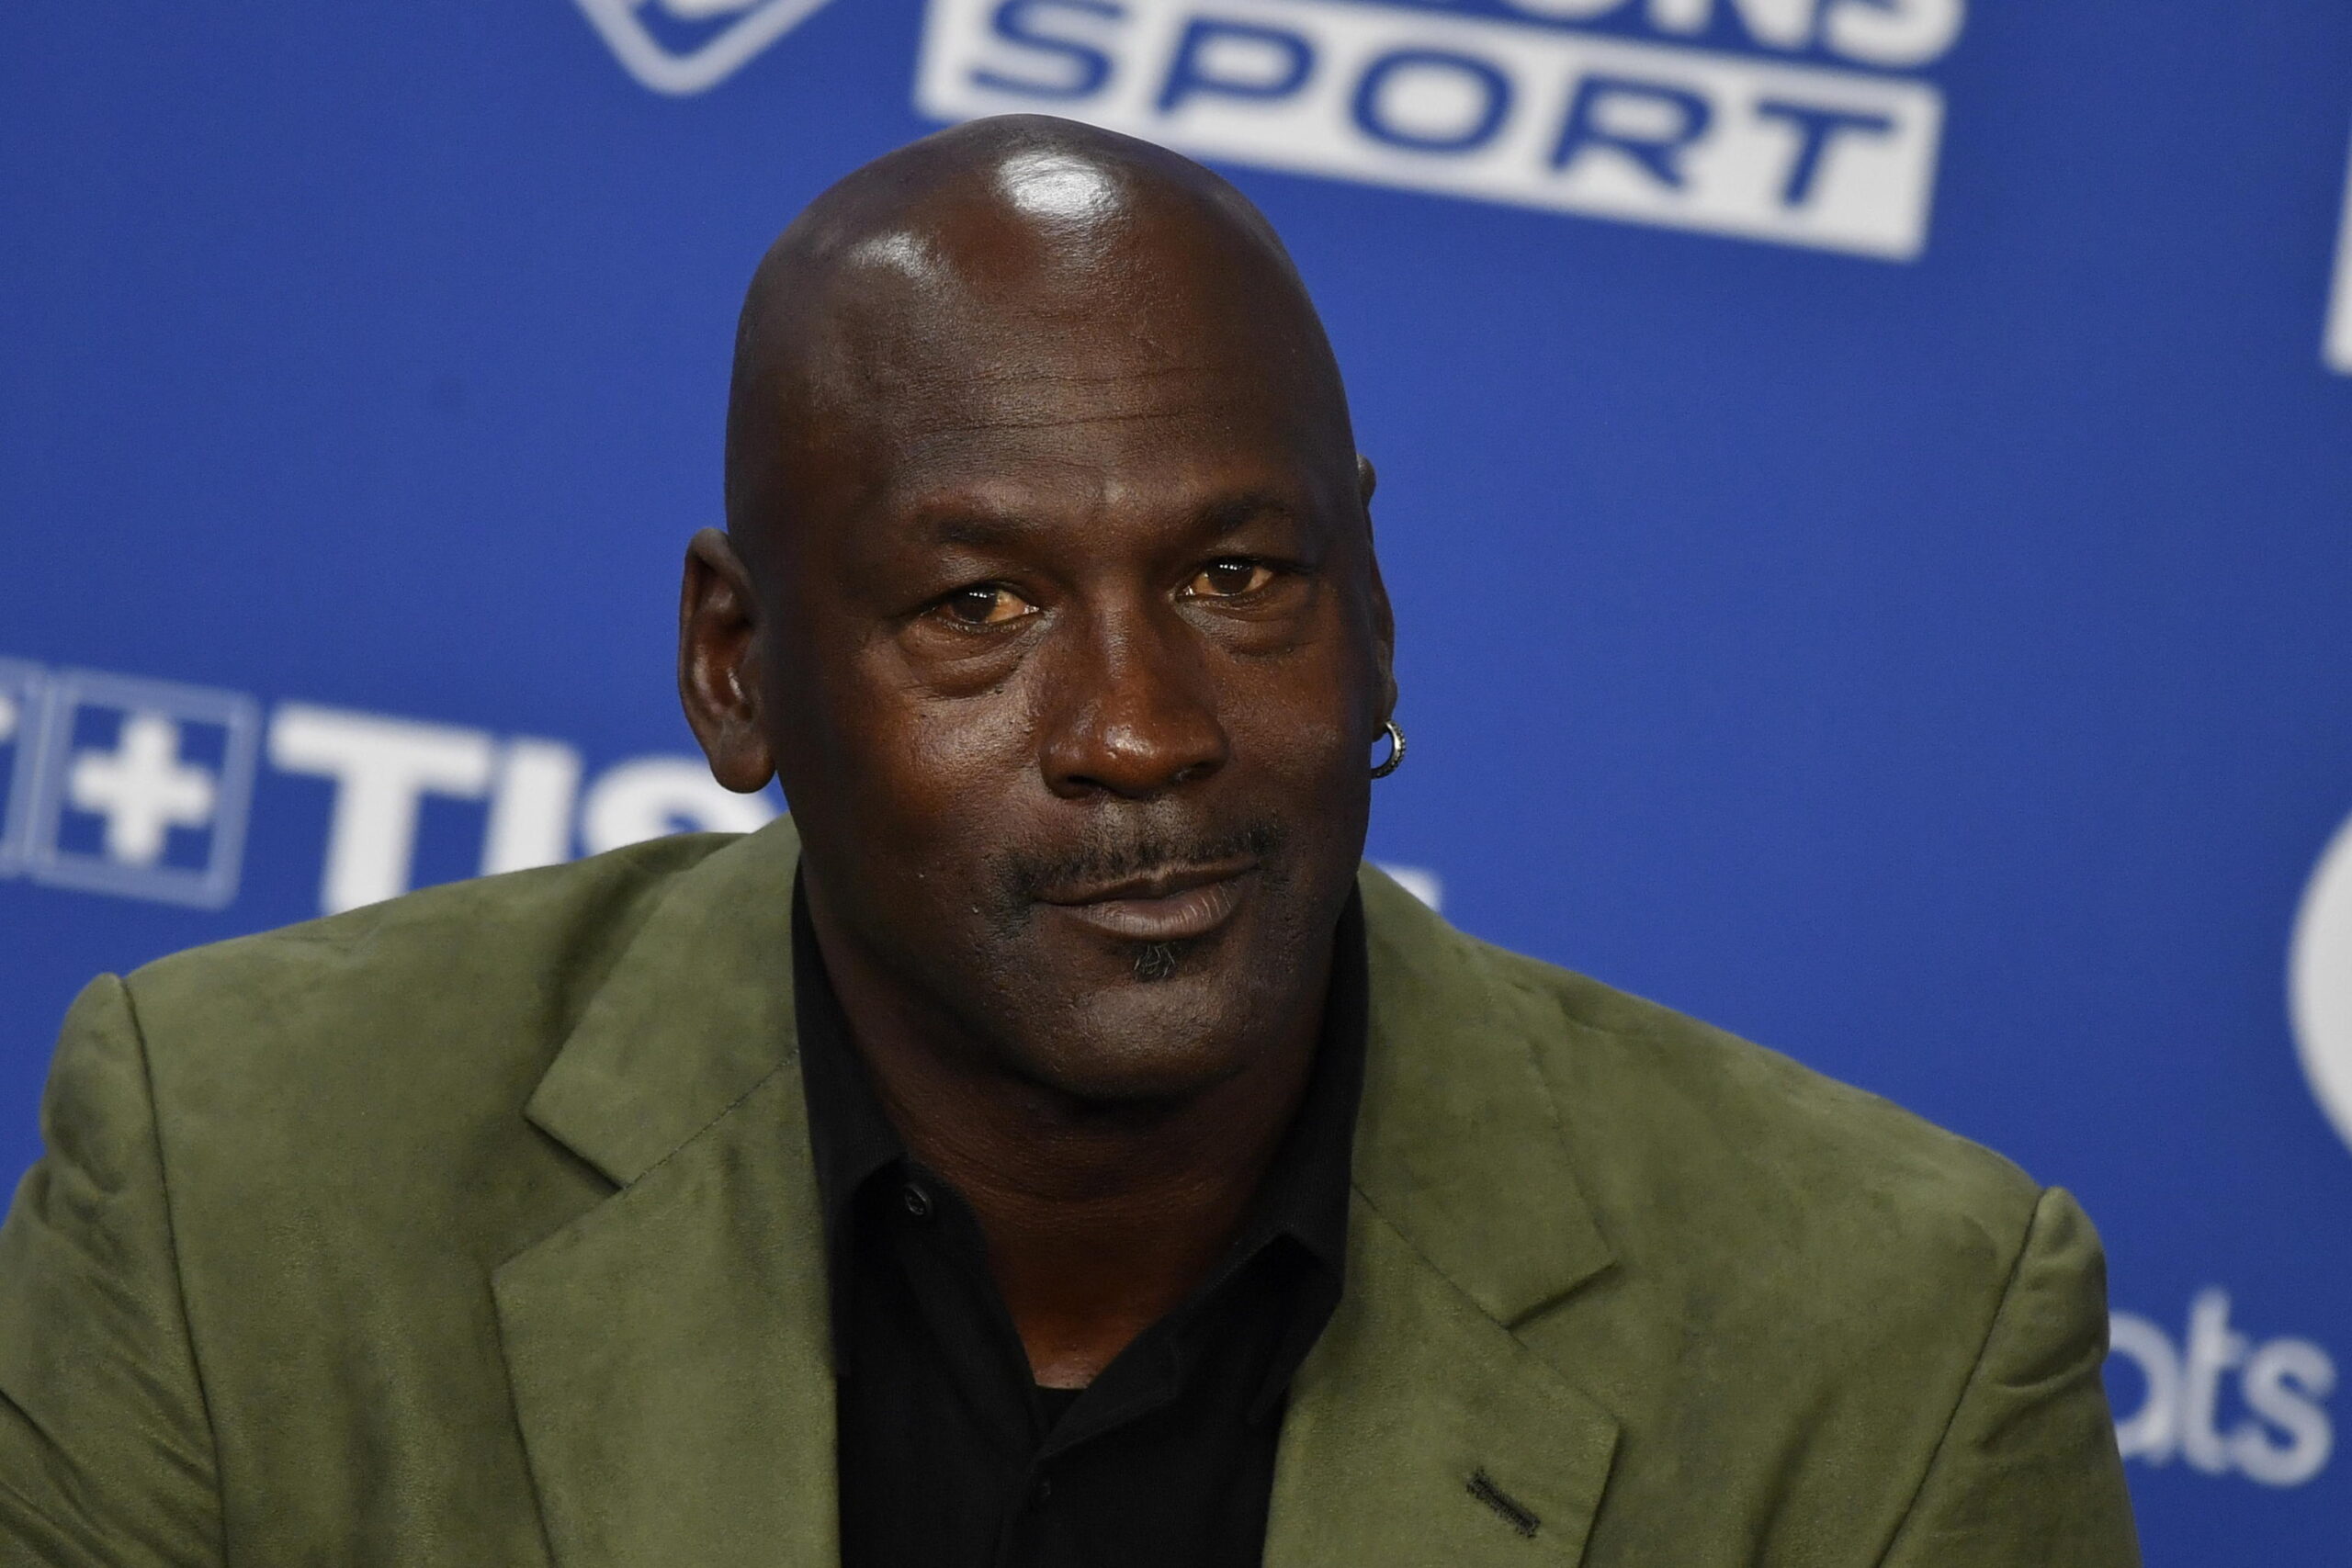 epa08160604 Charlotte Hornets owner and former NBA player Michael Jordan during a press conference before the NBA basketball game between the Charlotte Hornets and the Milwaukee Bucks at AccorHotels Arena, in Paris, France, 24 January 2020.  EPA/JULIEN DE ROSA